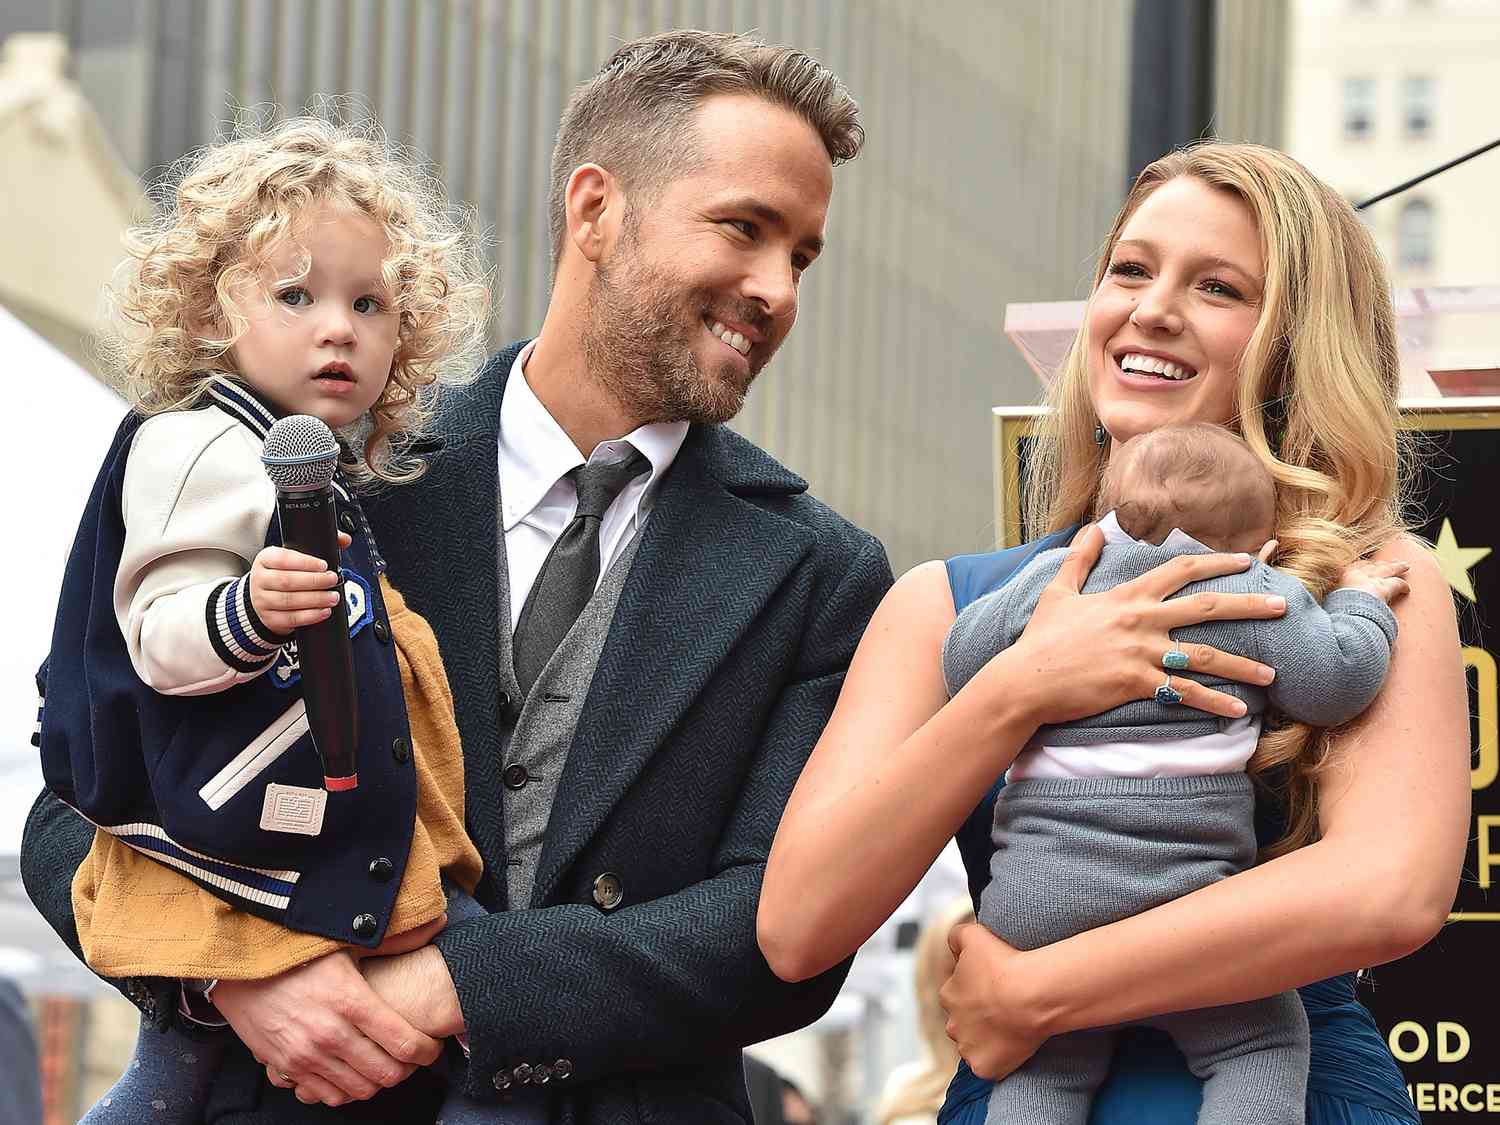 Ryan Reynolds Reveals He and Blake Lively Spent Recent Date Night Talking About This Topic the 'Whole Time'